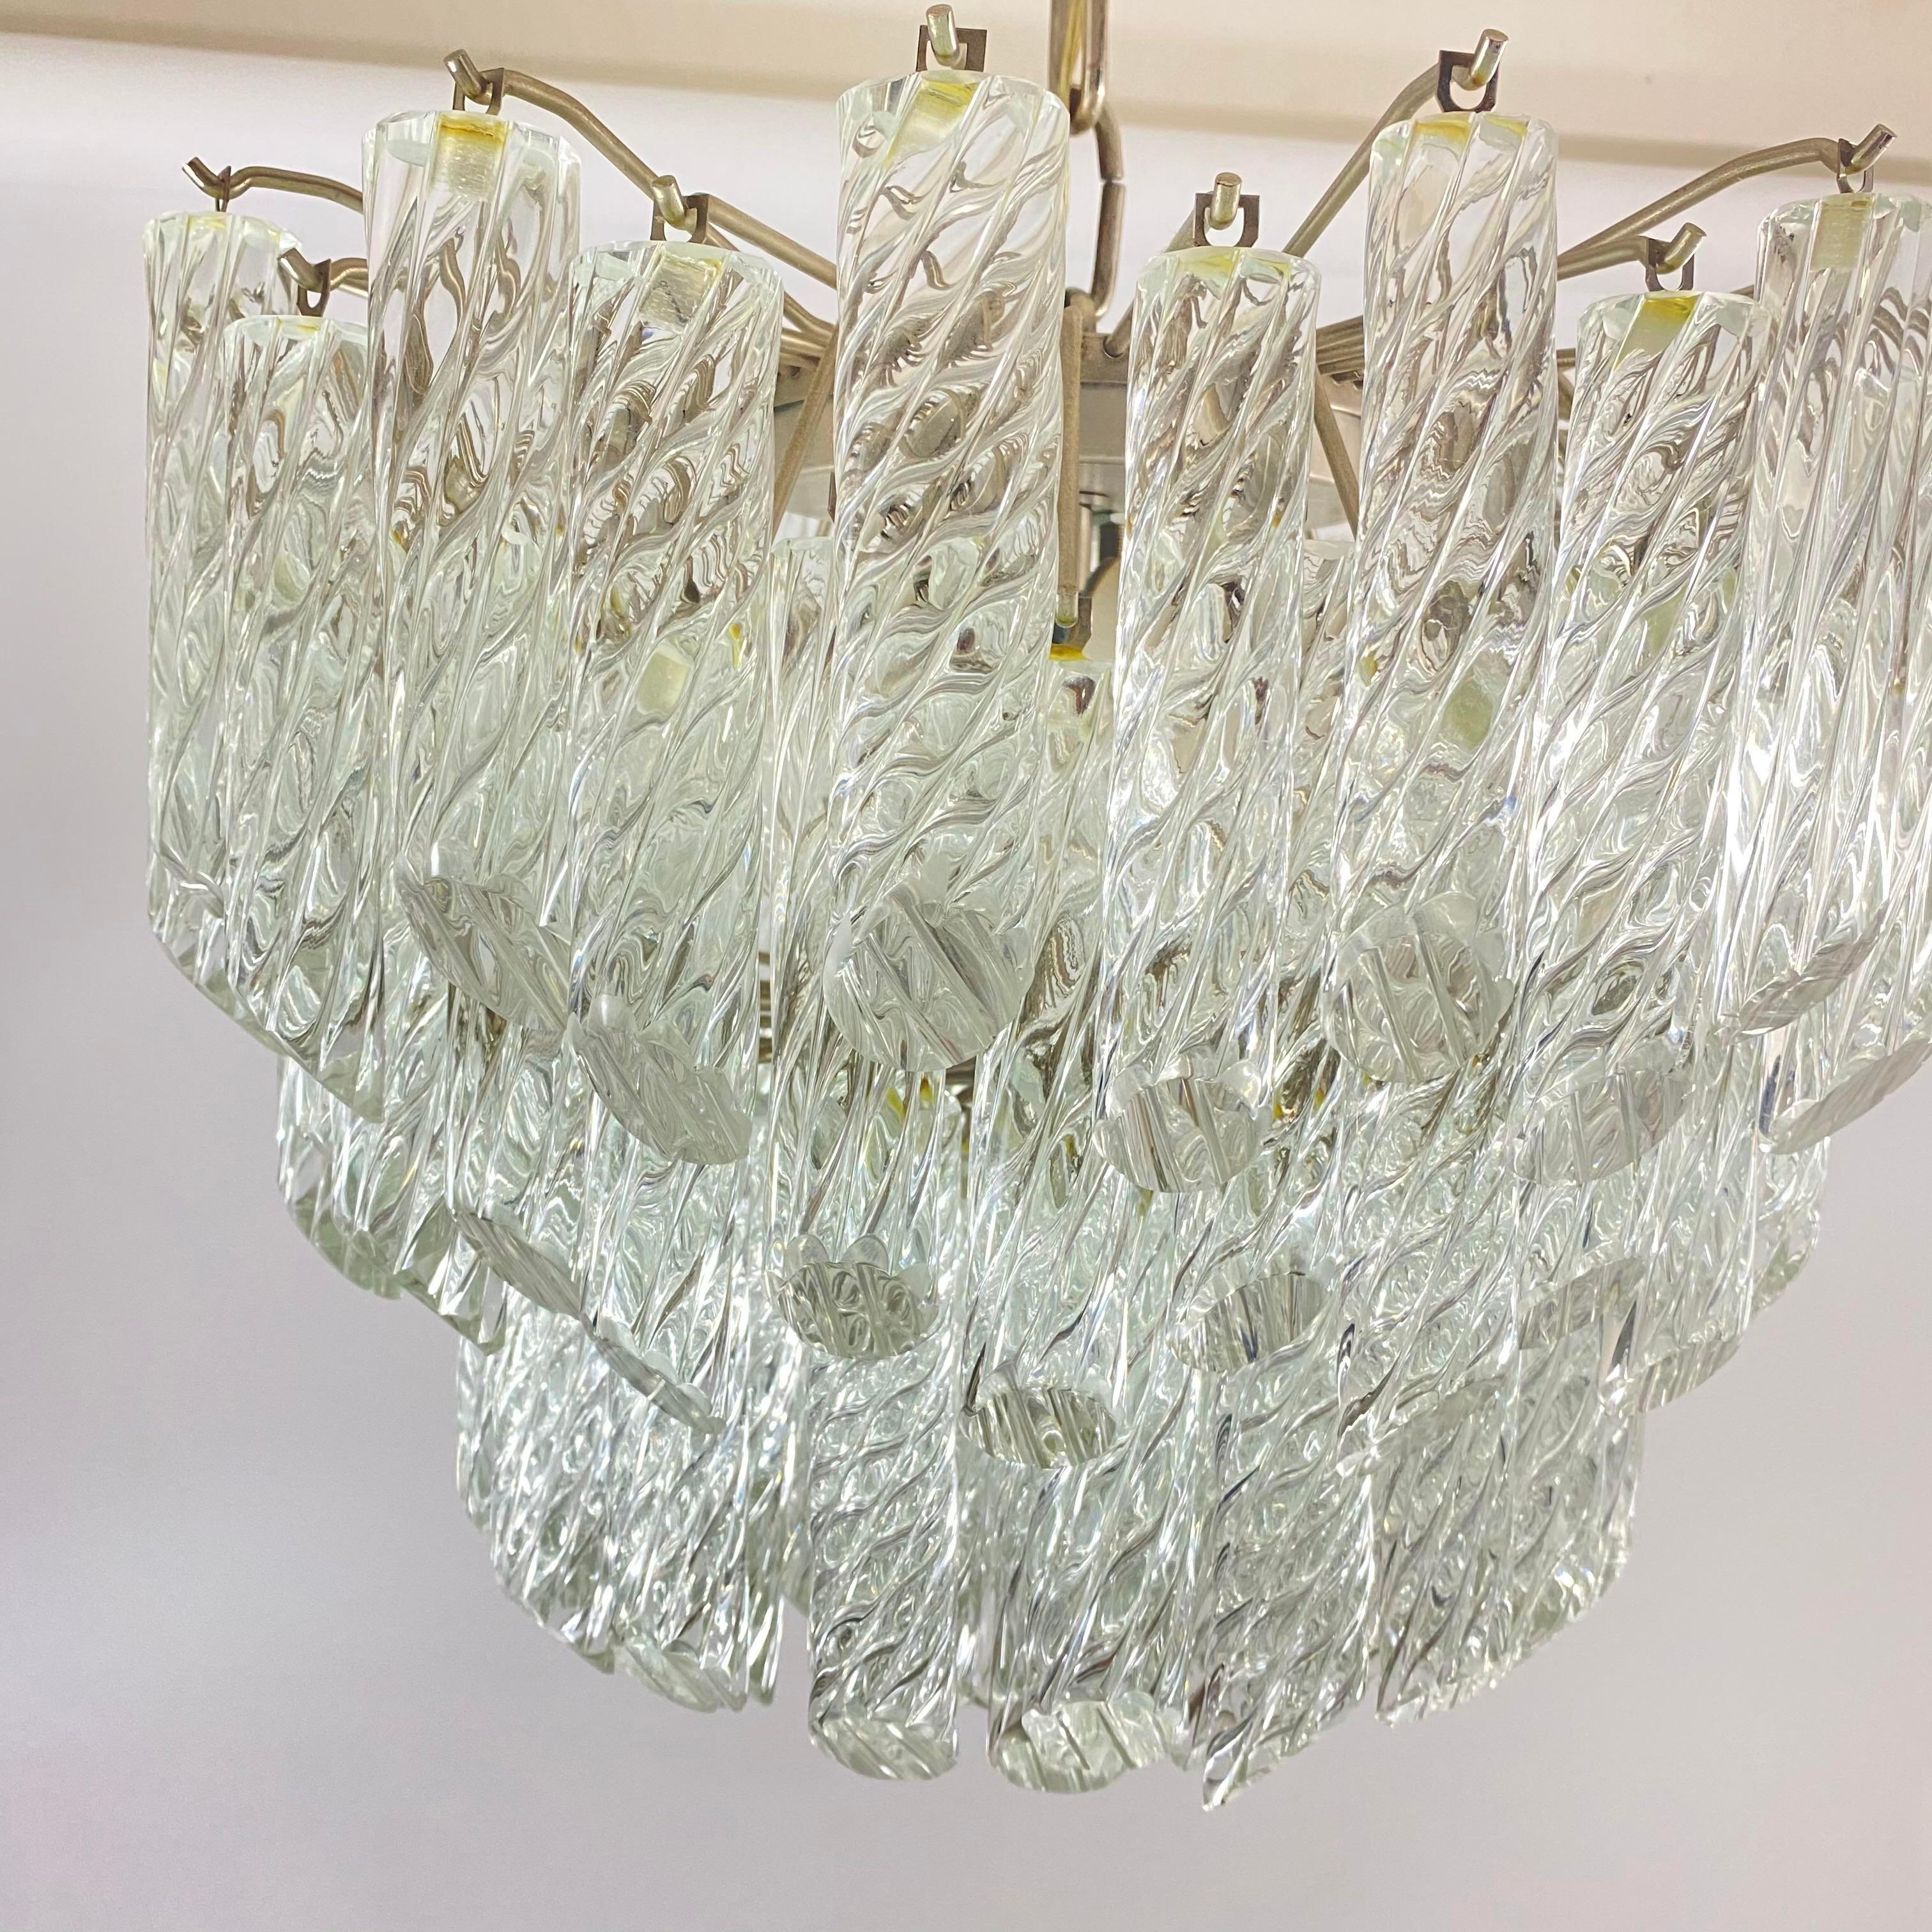 1960s Camer Spiral Murano Glass Chandelier For Sale 2